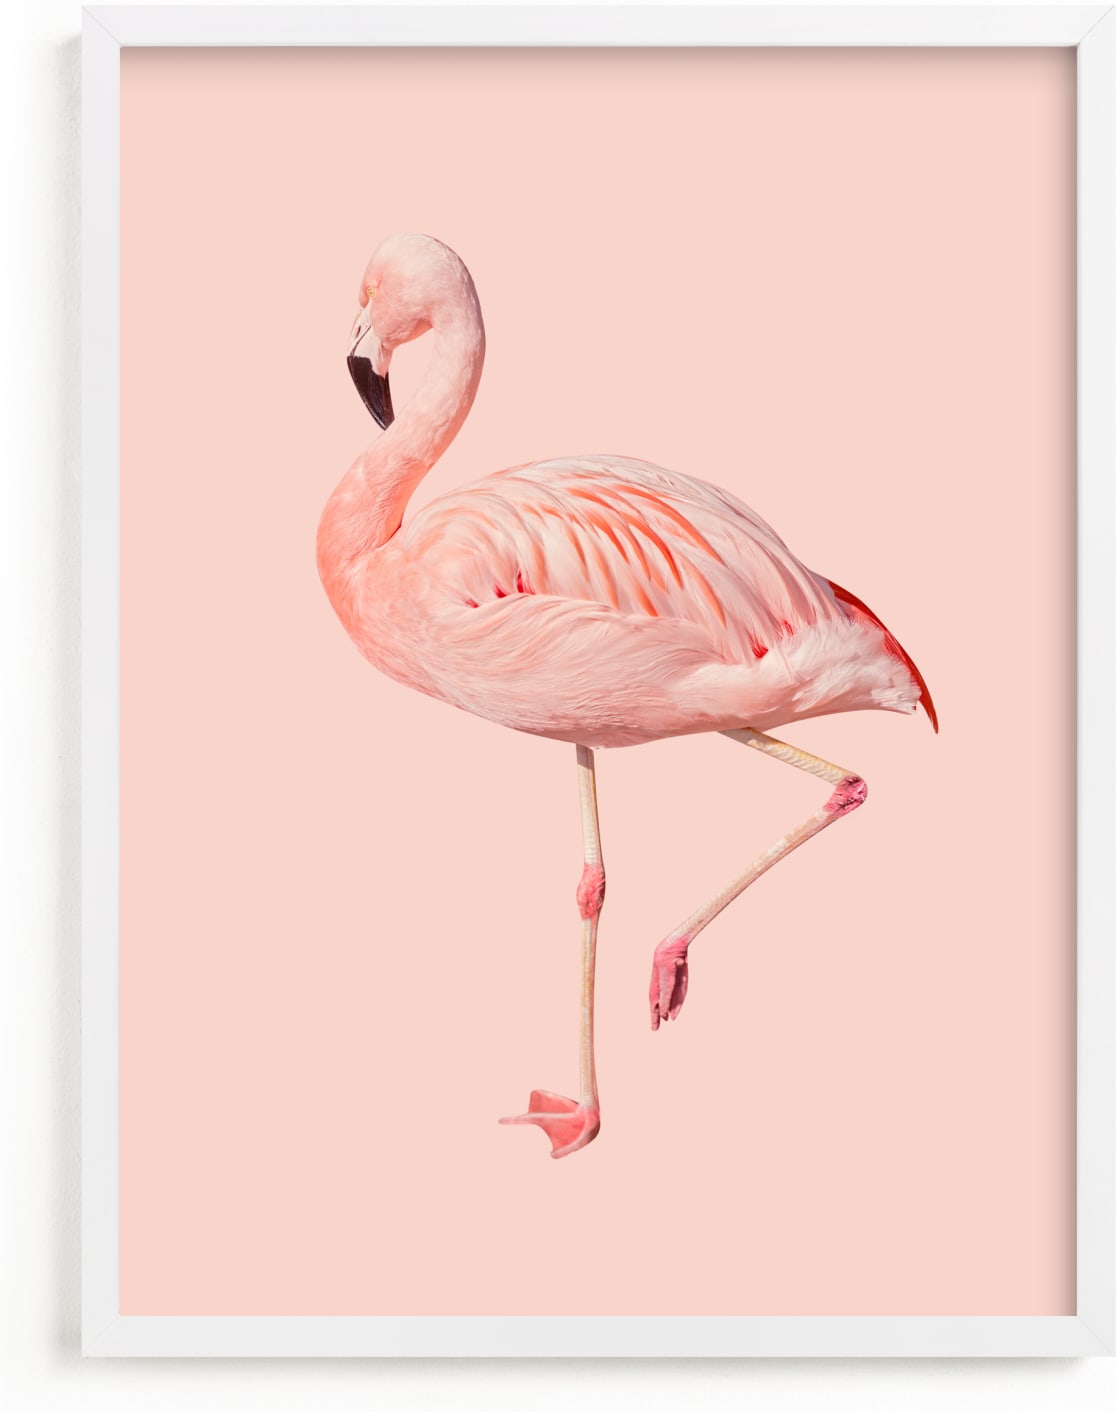 This is a pink kids wall art by Jessica C Nugent called Pink Flamingo.